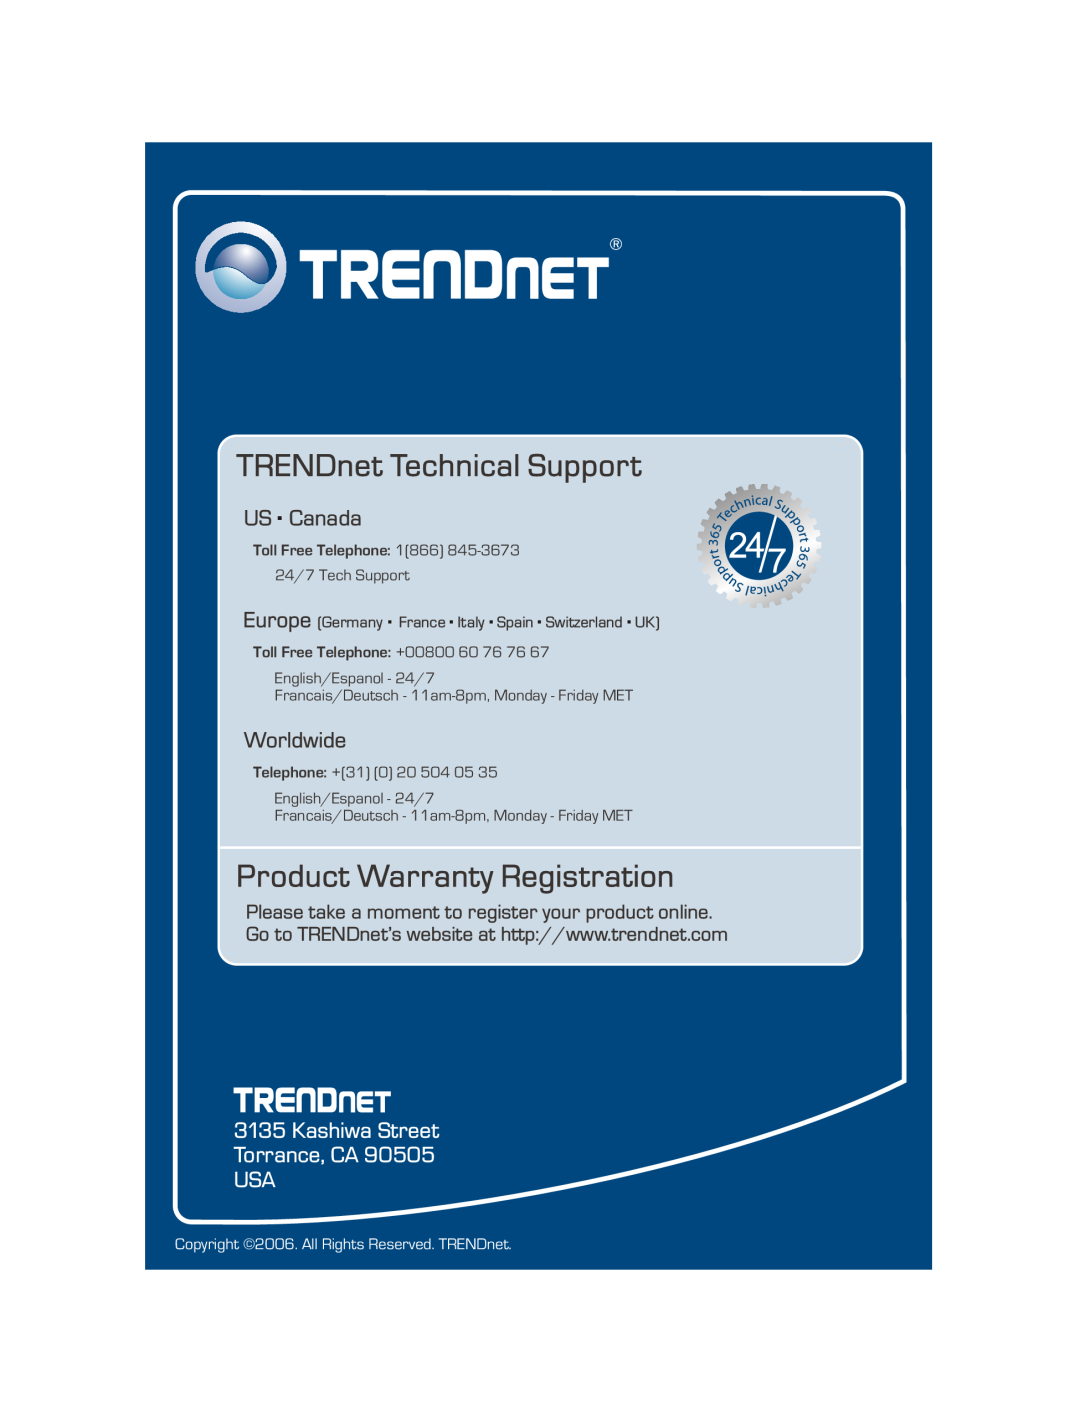 TRENDnet S55Eplus TRENDnet Technical Support, Product Warranty Registration, US . Canada, Worldwide, Toll Free Telephone 